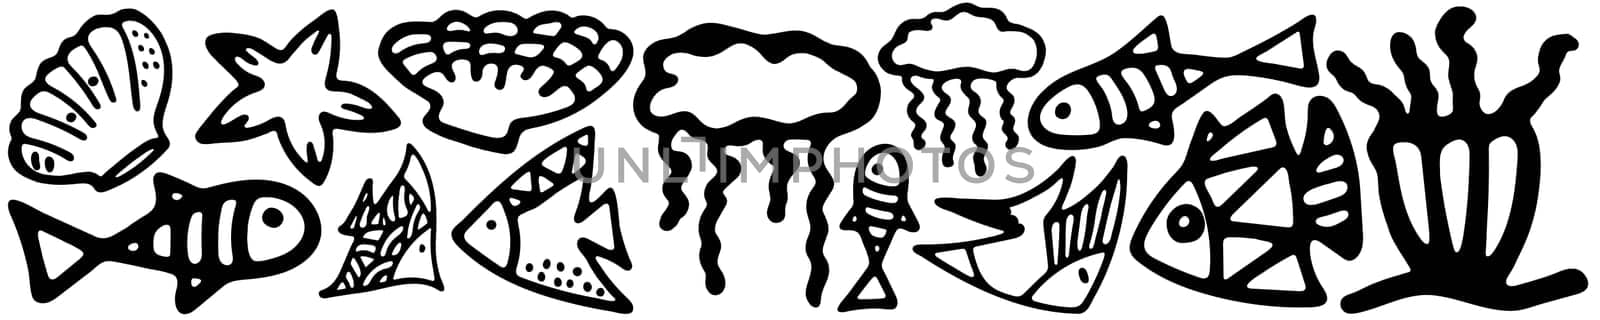 Set of cartoon fish, coral, starfish, anemone and jellyfish. Isolated objects on white background. Inhabitants of the underwater world for game, app, banner, swimming pool, print, kids and stickers.